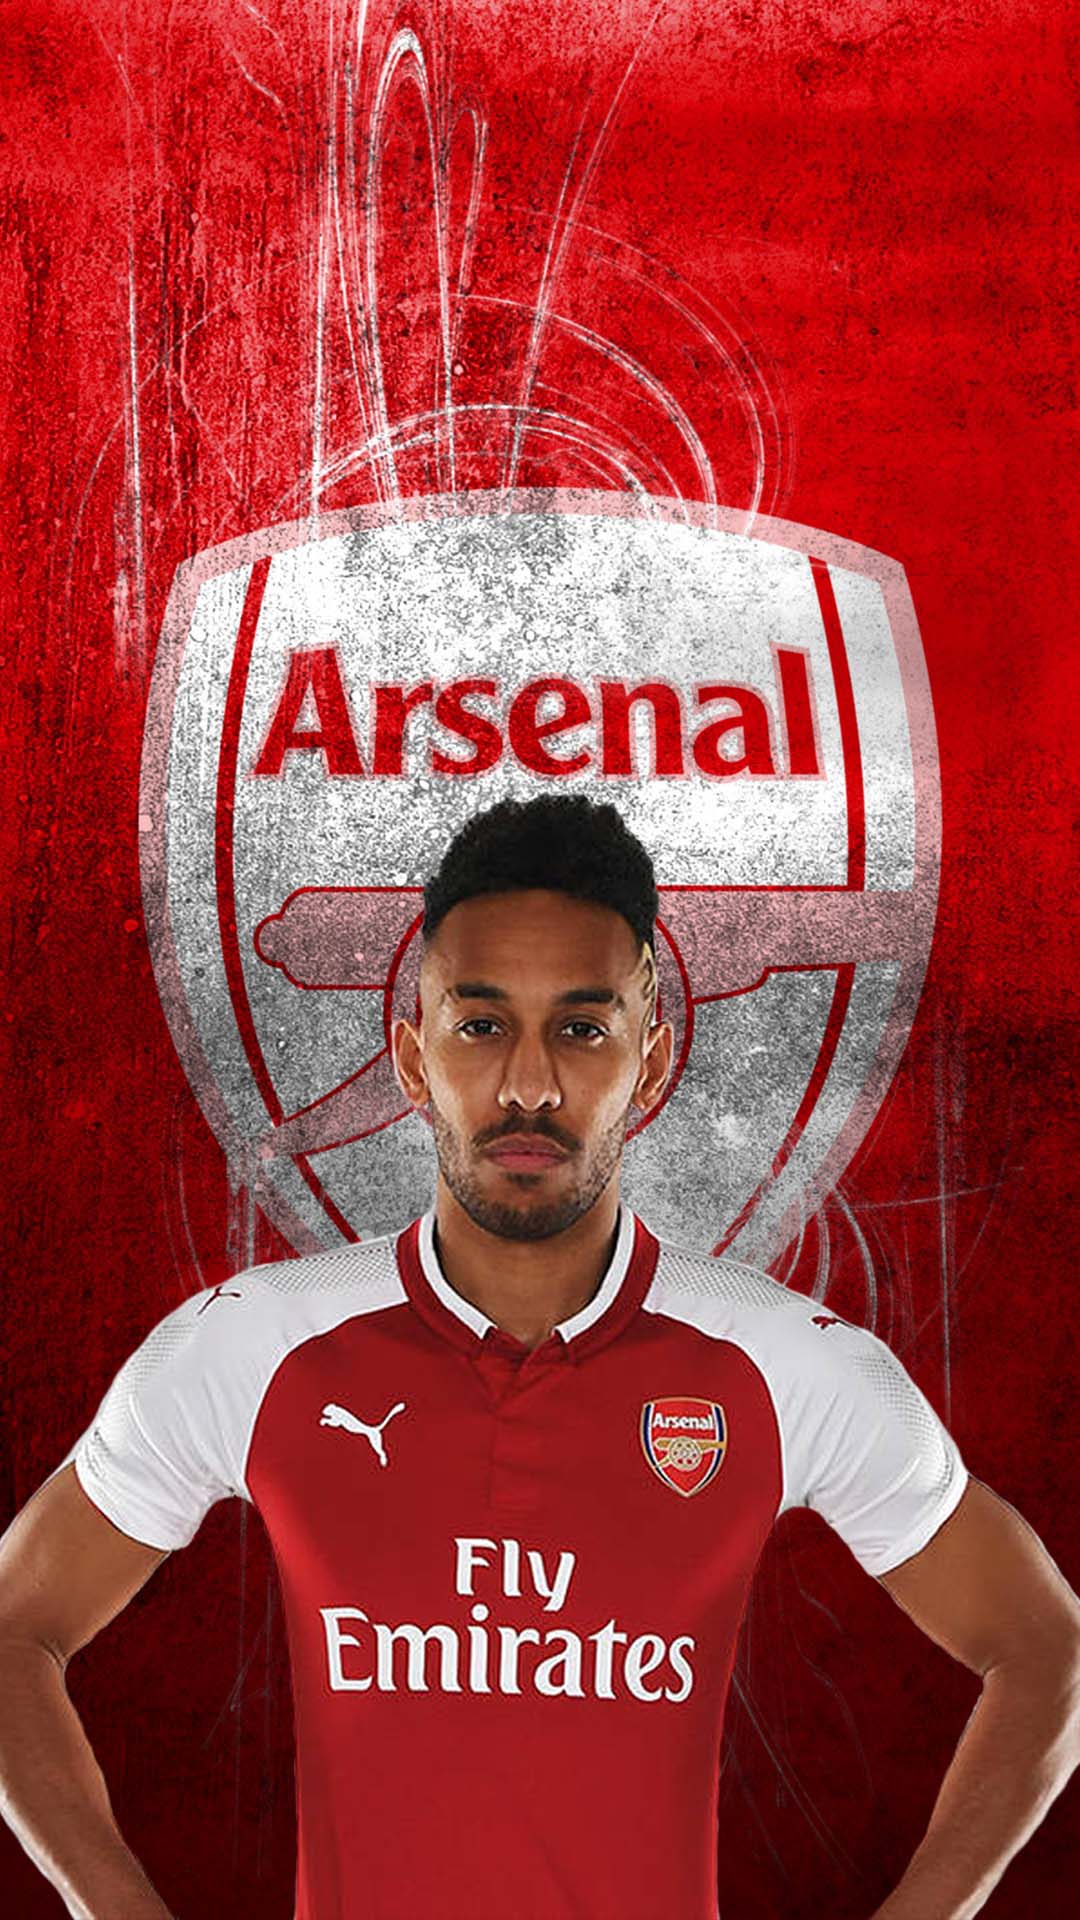 Aubameyang Arsenal Android Wallpaper with HD resolution 1080x1920